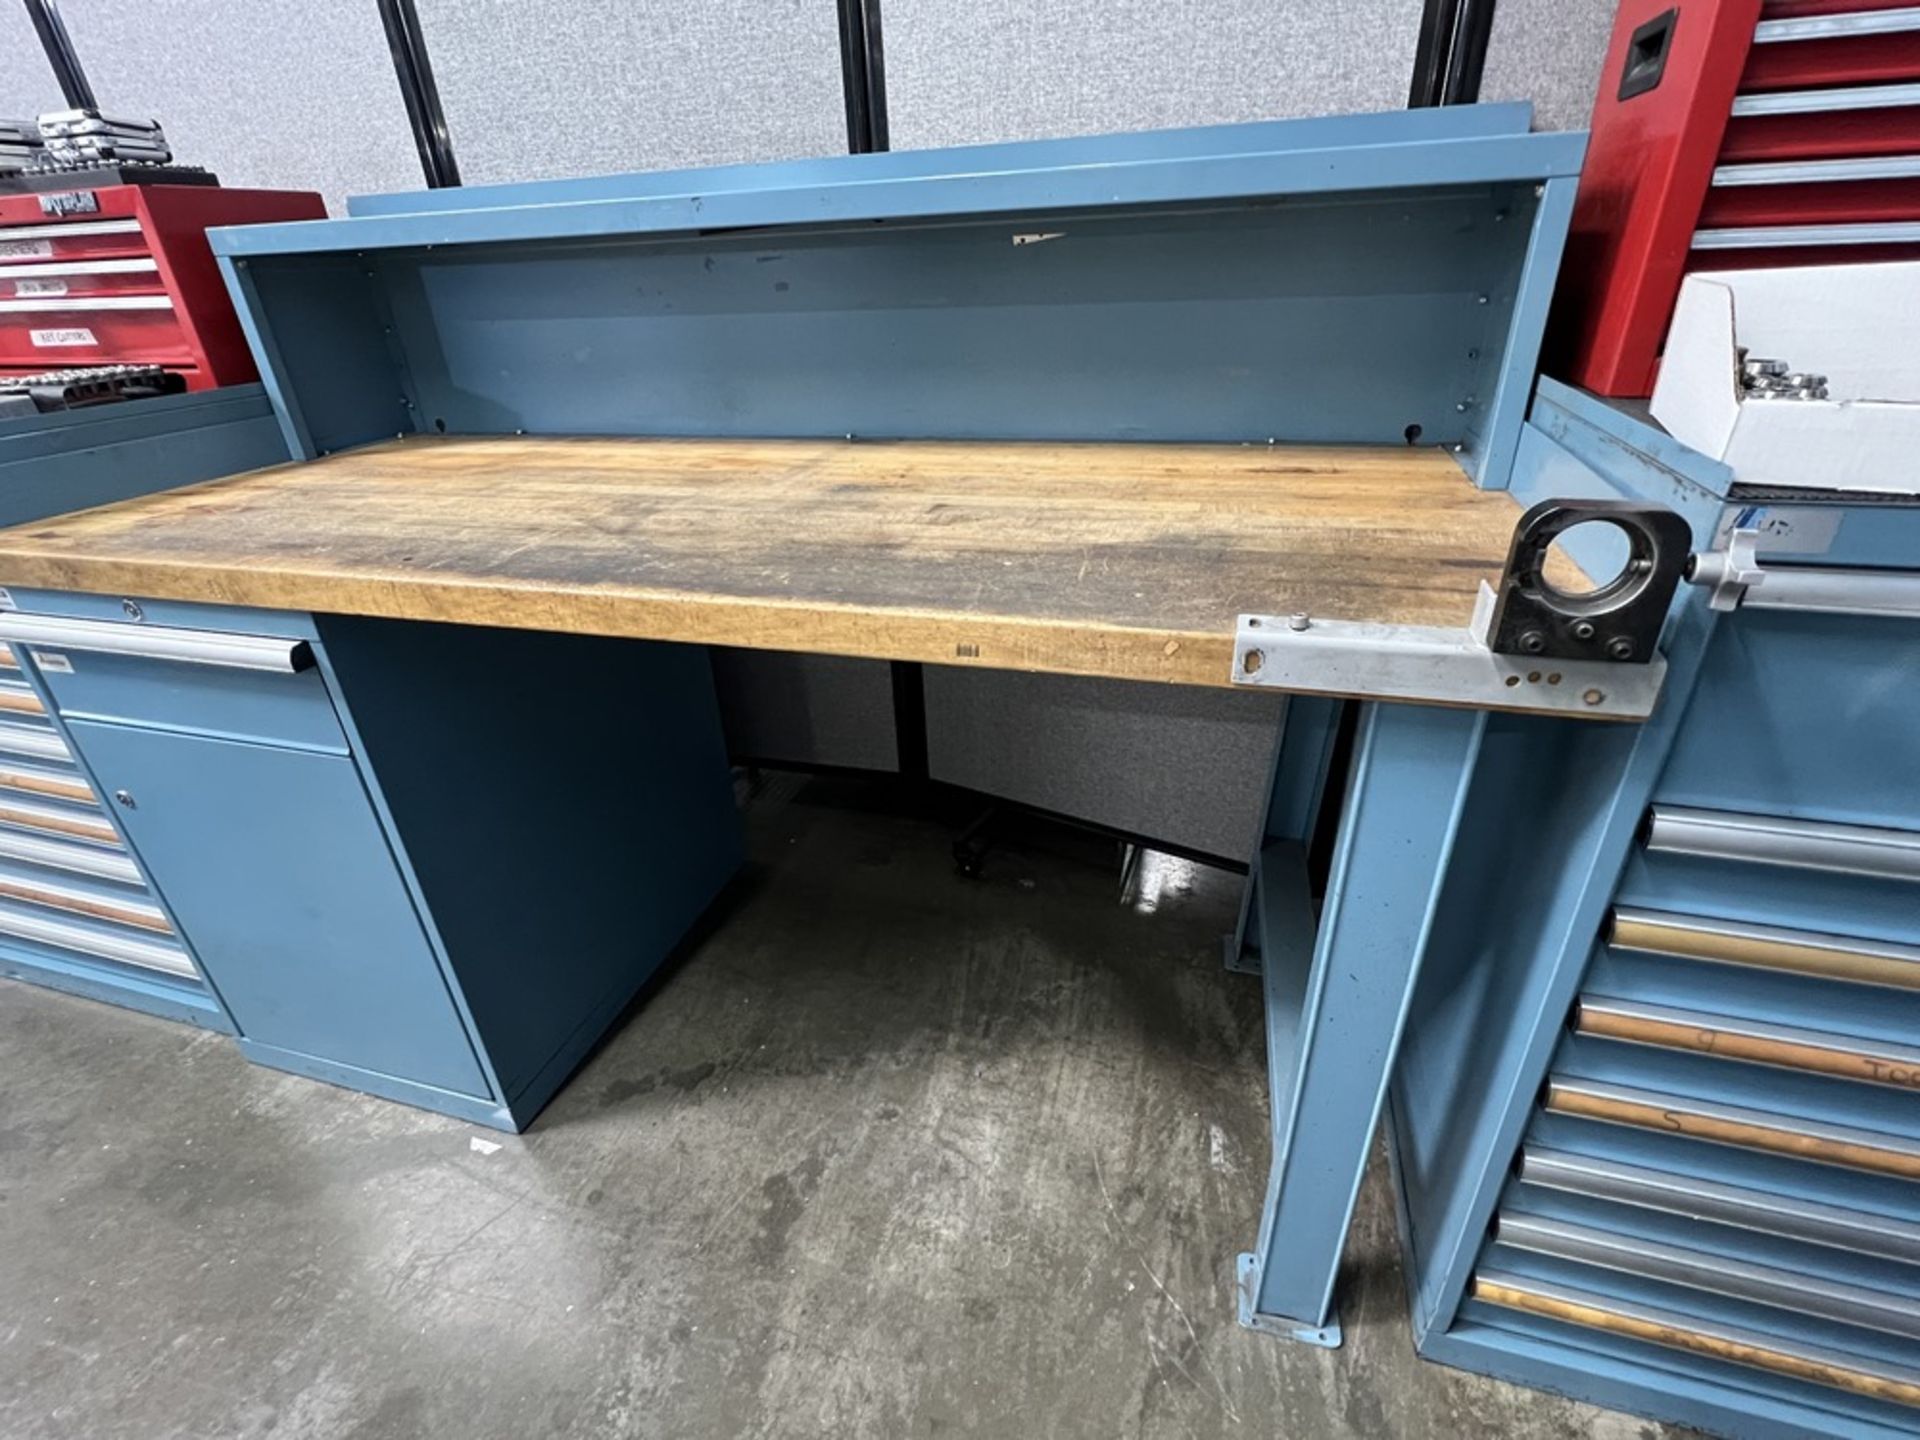 Lista Work Bench With Drawer & Cabinet and Top Shelf - Image 8 of 8